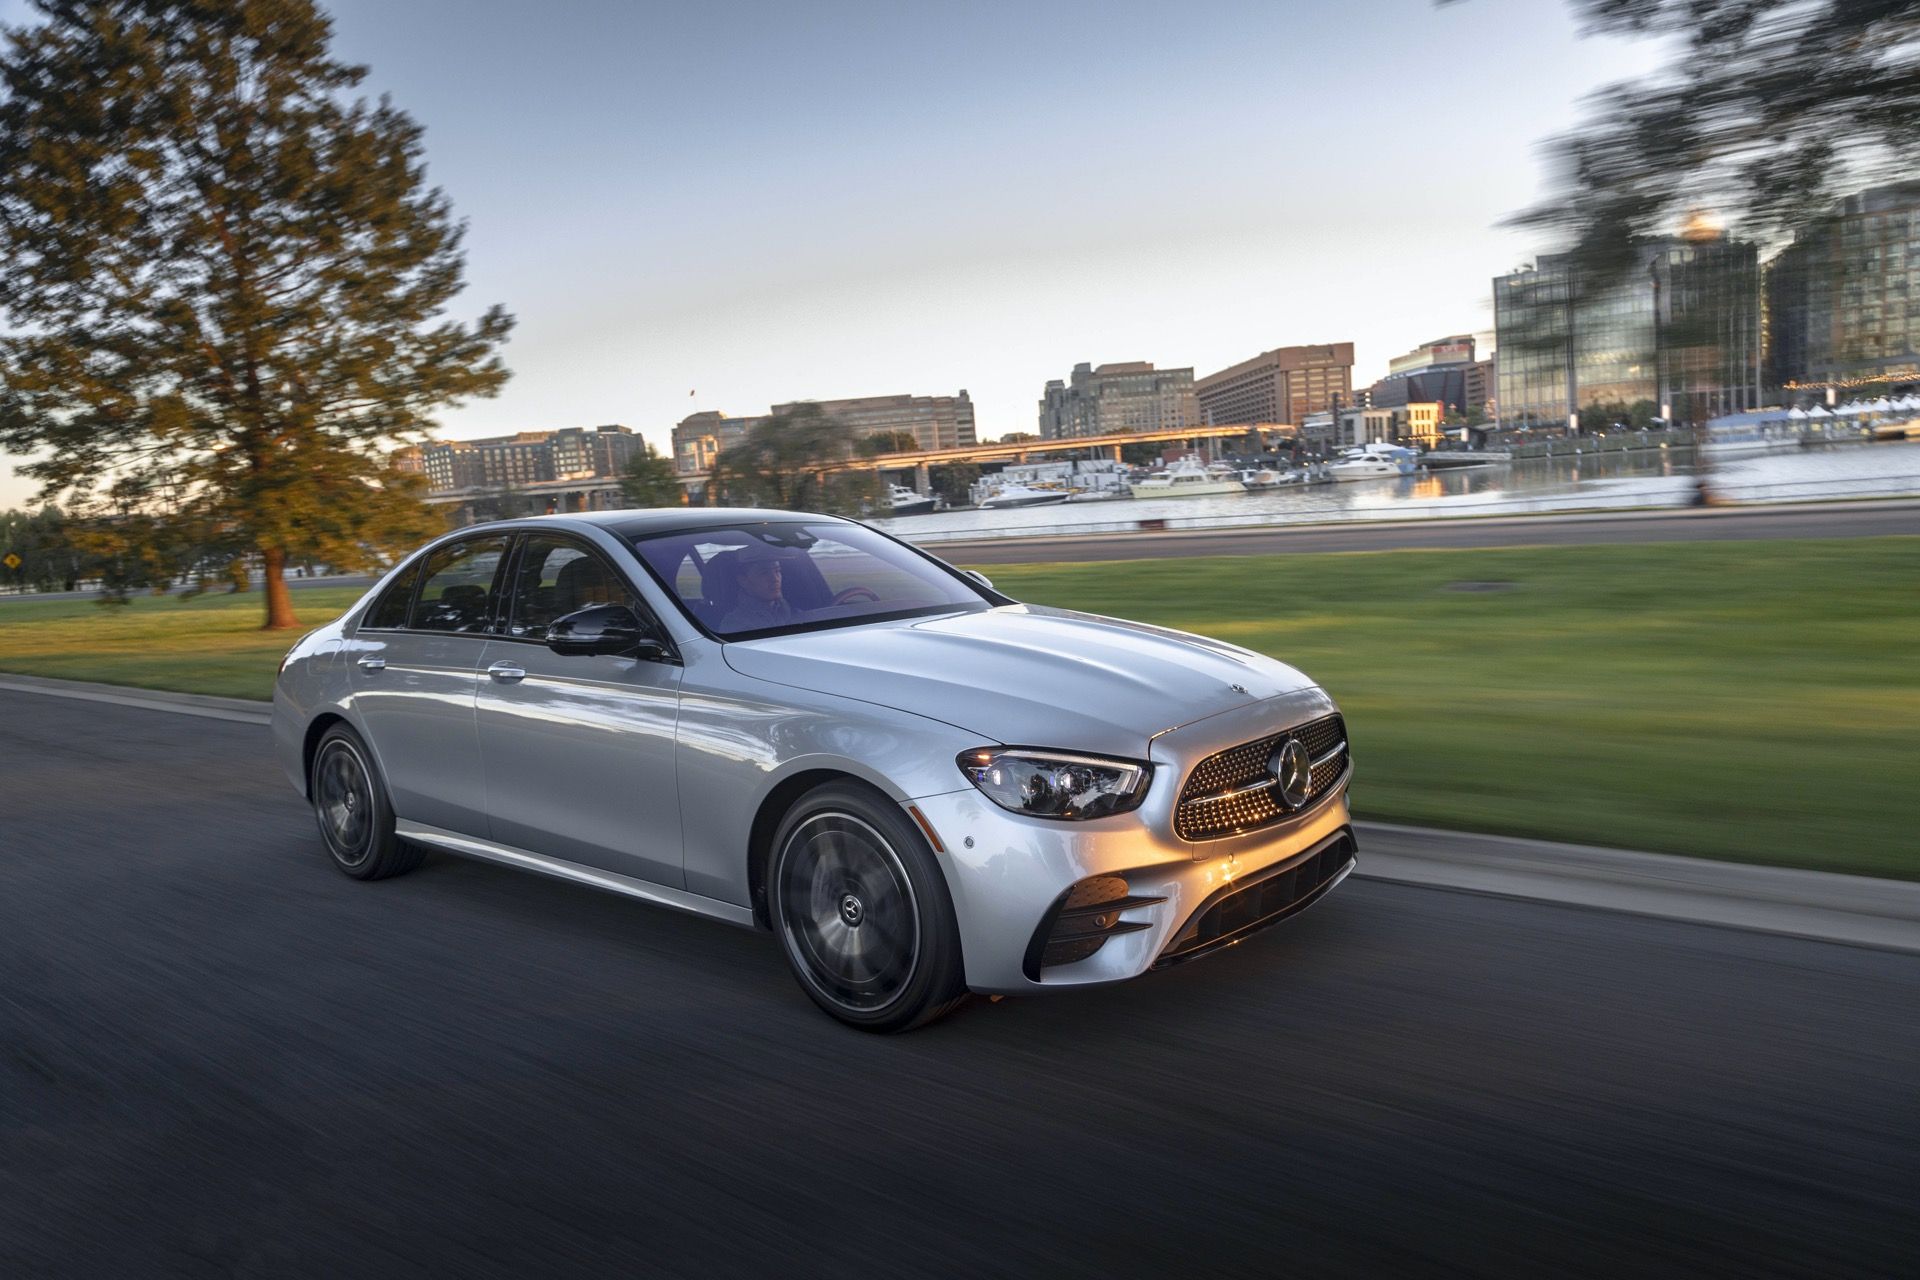 Mercedes Benz E Class Review, Ratings, Specs, Prices, And Photo Car Connection